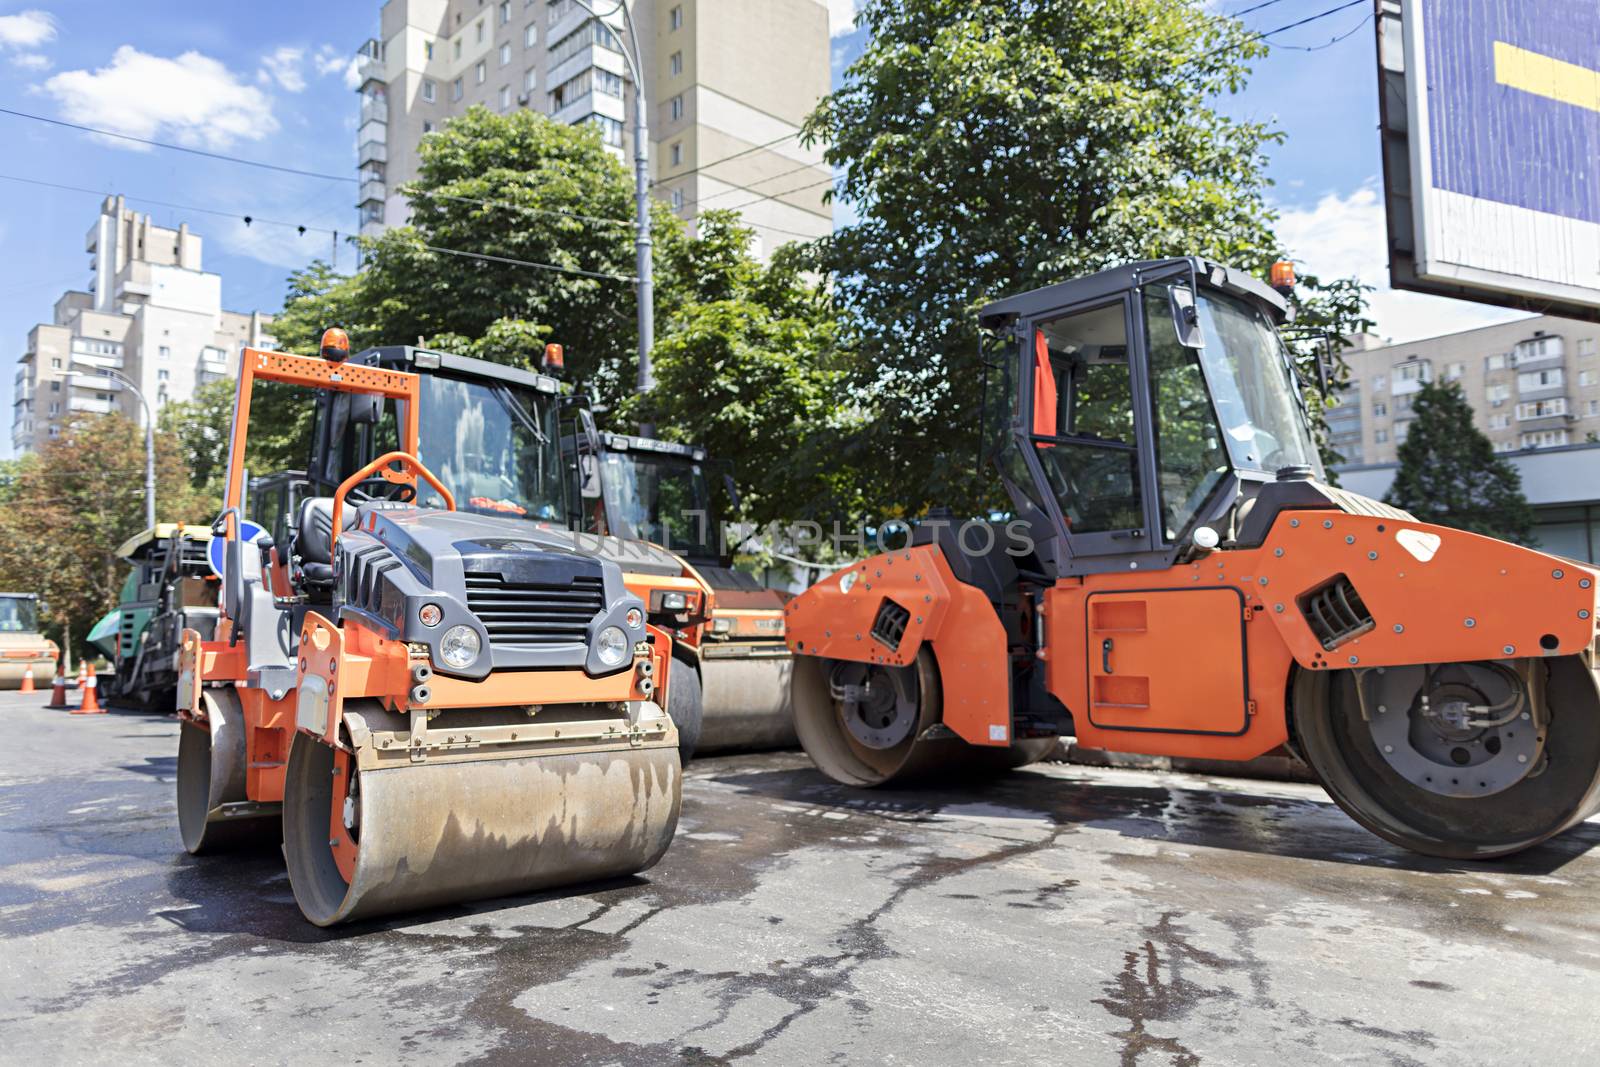 Among the summer noon five heavy road vibrating roller compactors and other equipment are ready for repair of the road in a modern city